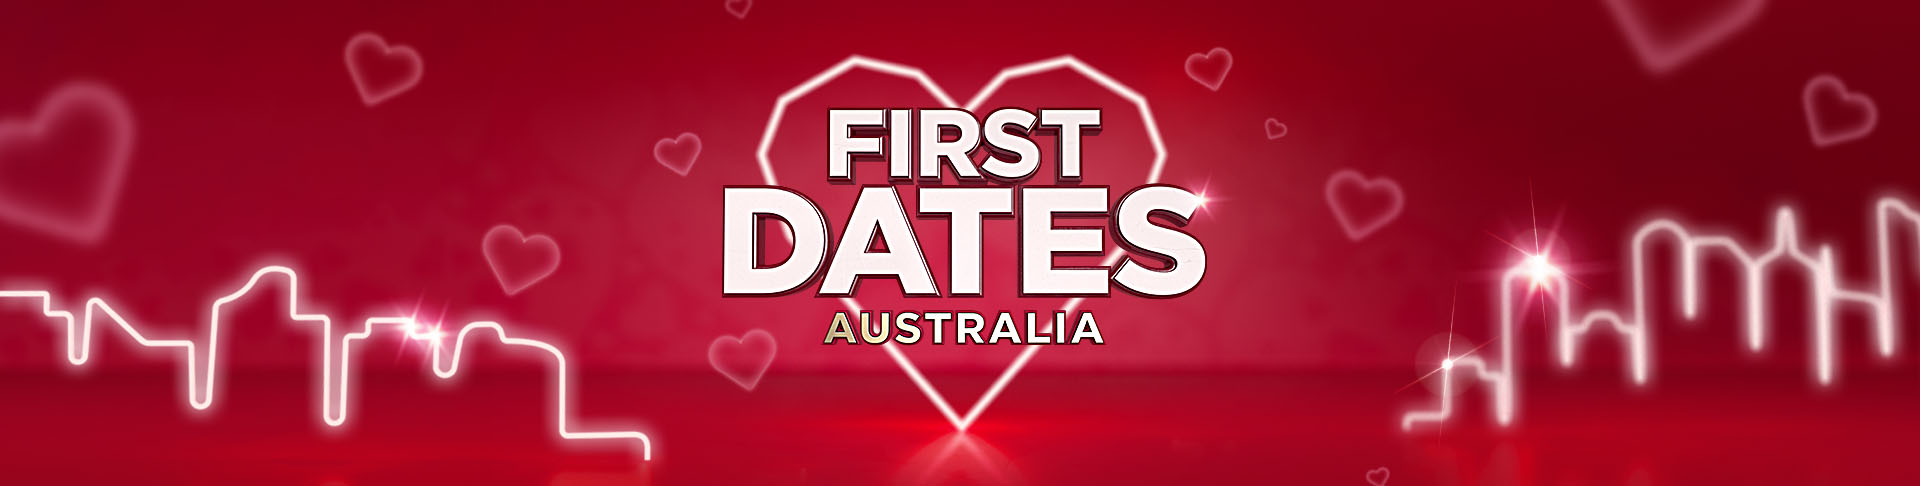 How can i watch first dates in australia?